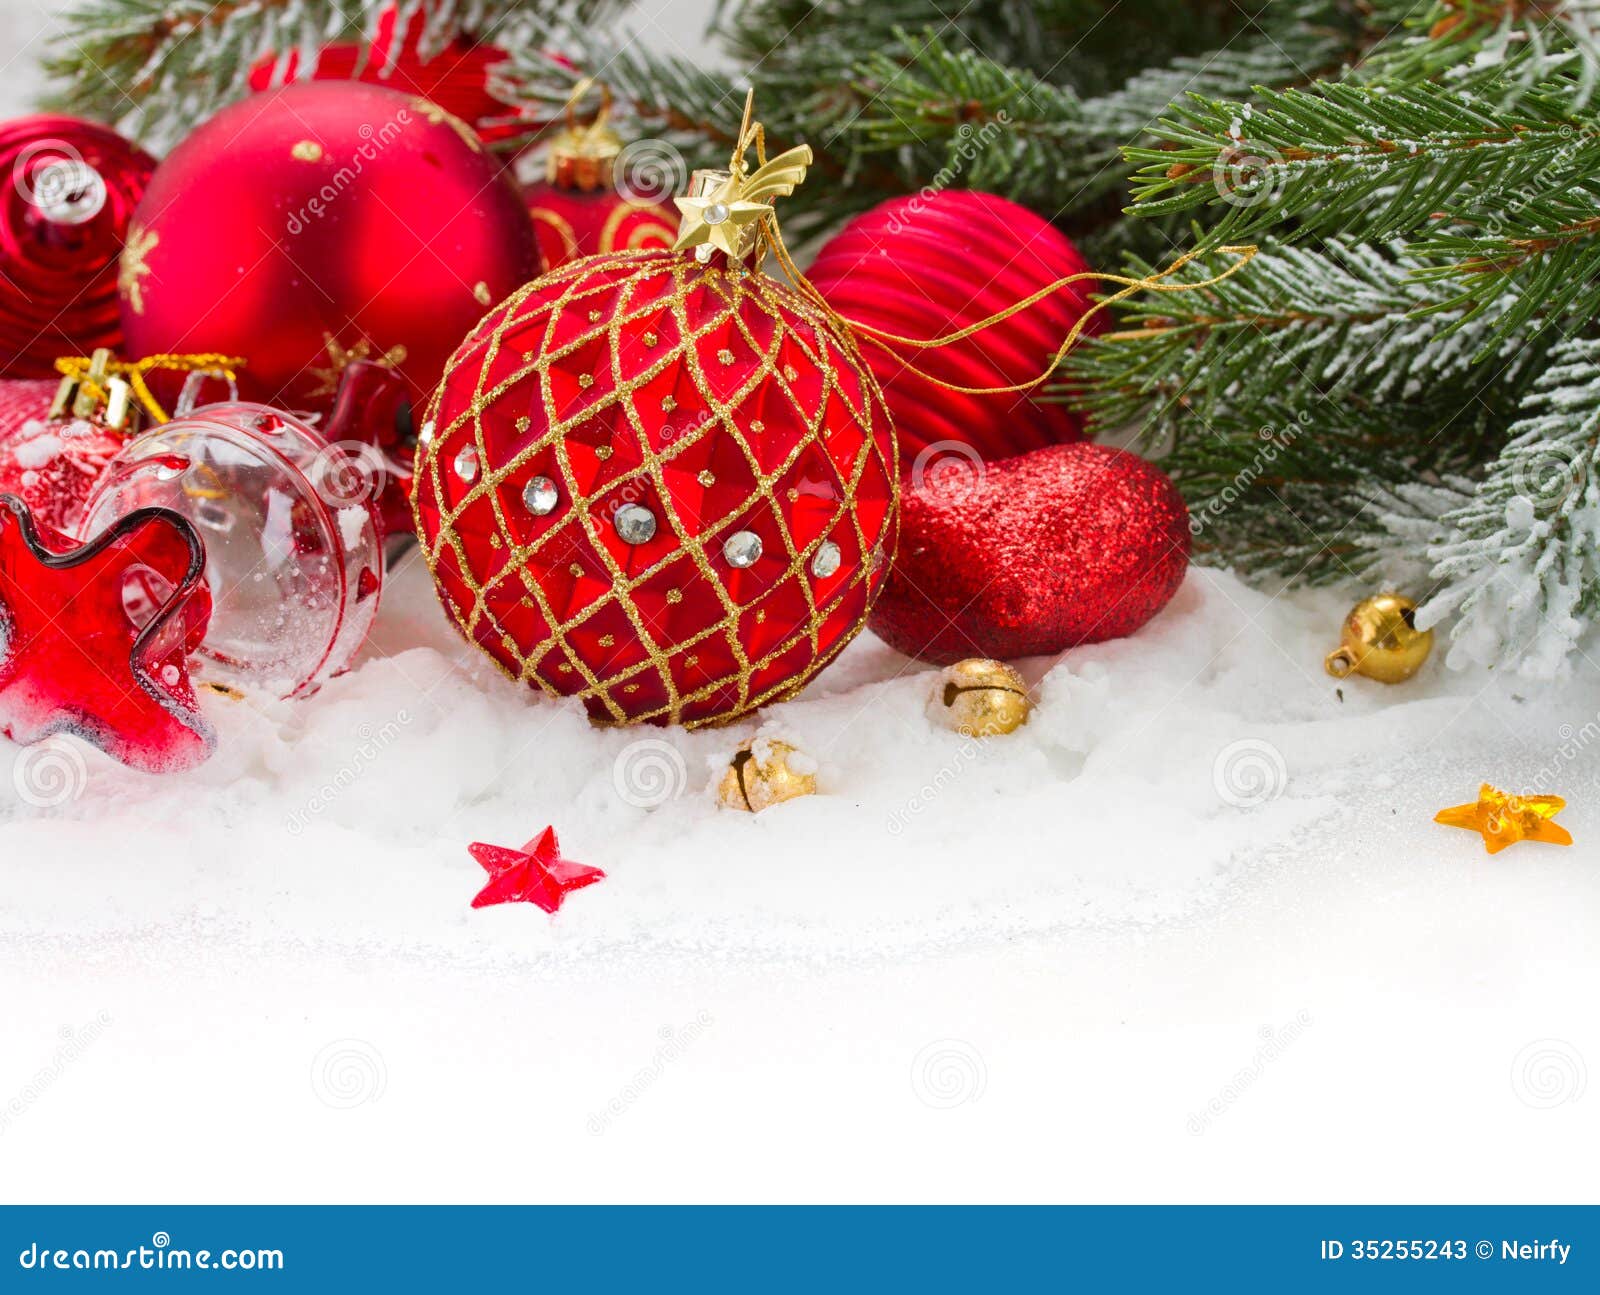 Evergreeen Tree and Red Christmas Decorations Stock Image - Image of ...